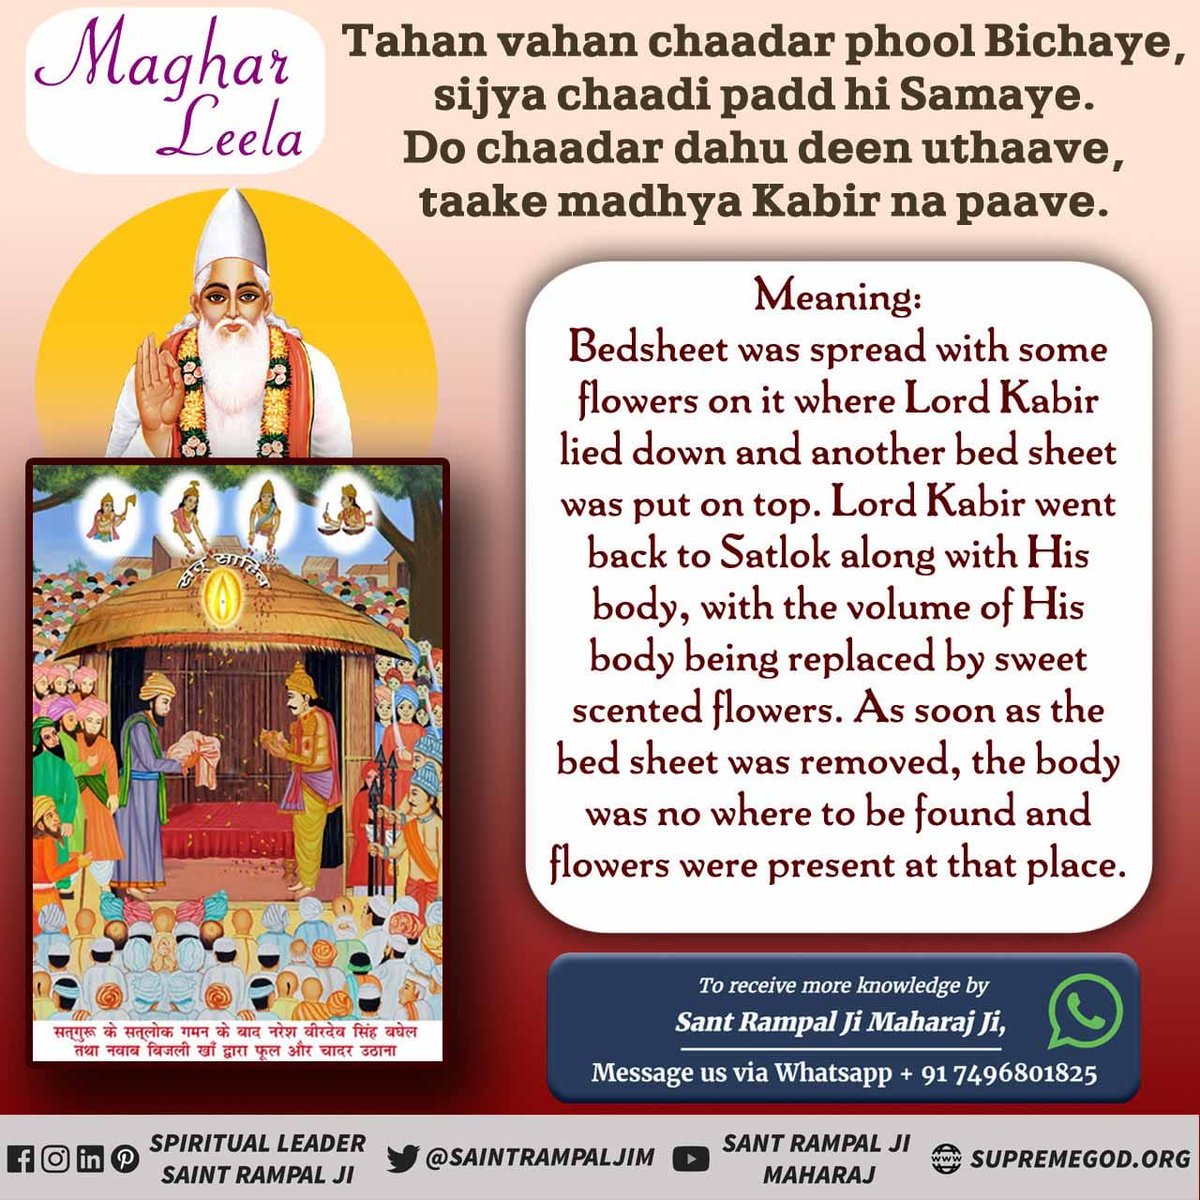 #ऐसे_सुख_देता_है_भगवान
Bedsheet was spread with some flowers on it where Lord Kabir lied down and another bed sheet was put on top. Lord Kabir went back to Satlok along with His body, with the volume of His body being replaced by sweet scented flowers. As soon as the bed sheet